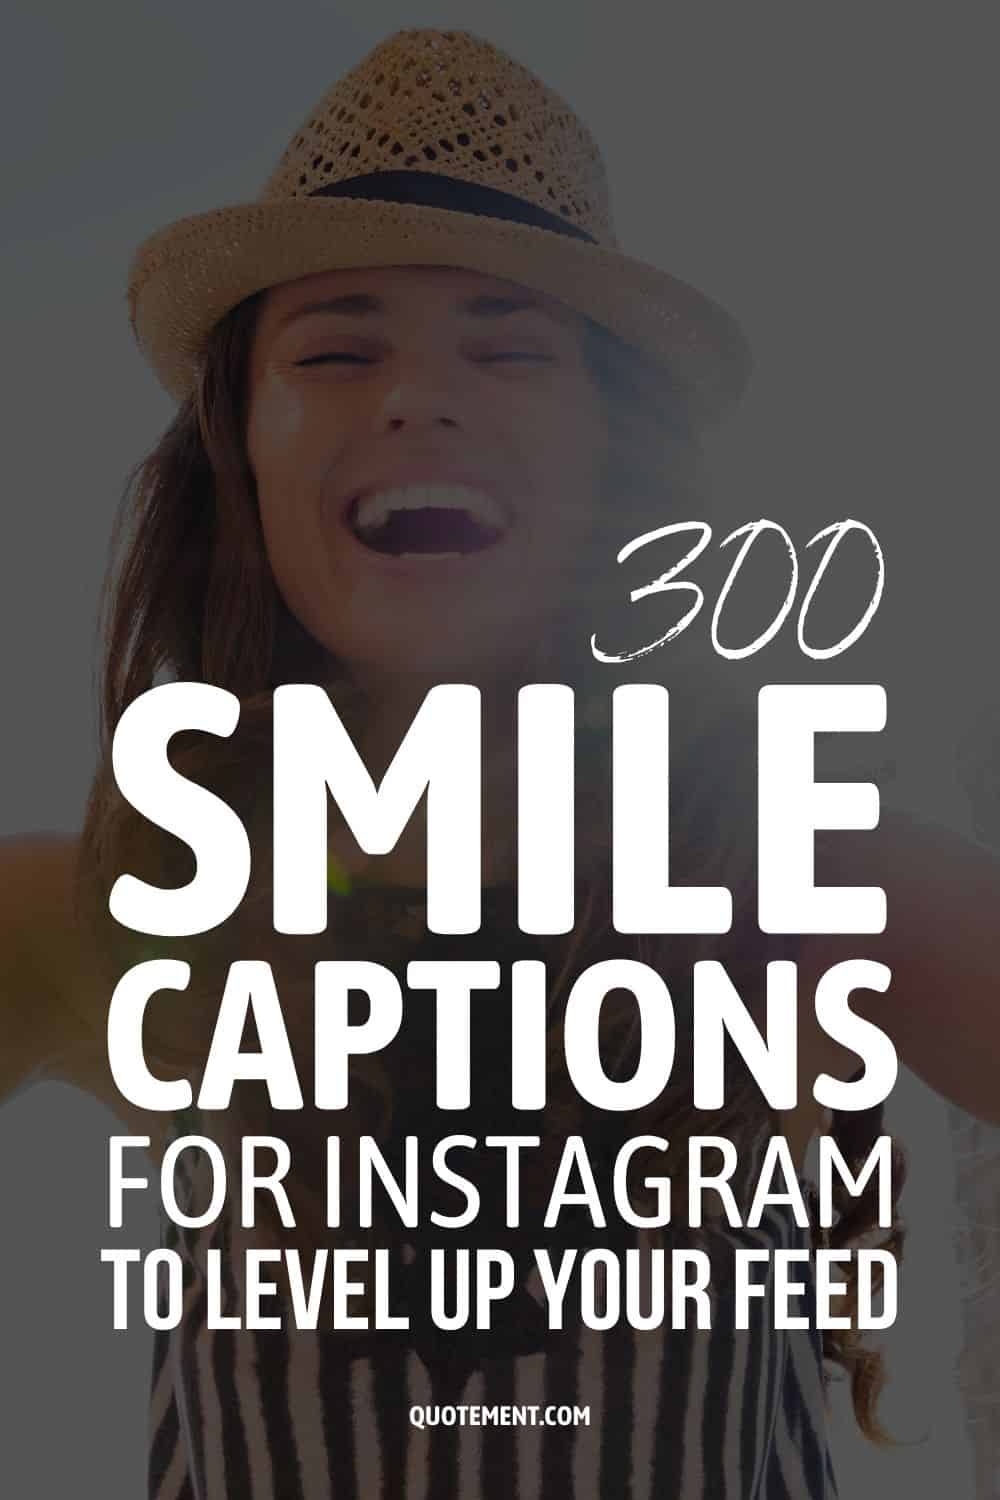 300 Smile Captions For Instagram To Level Up Your Feed
